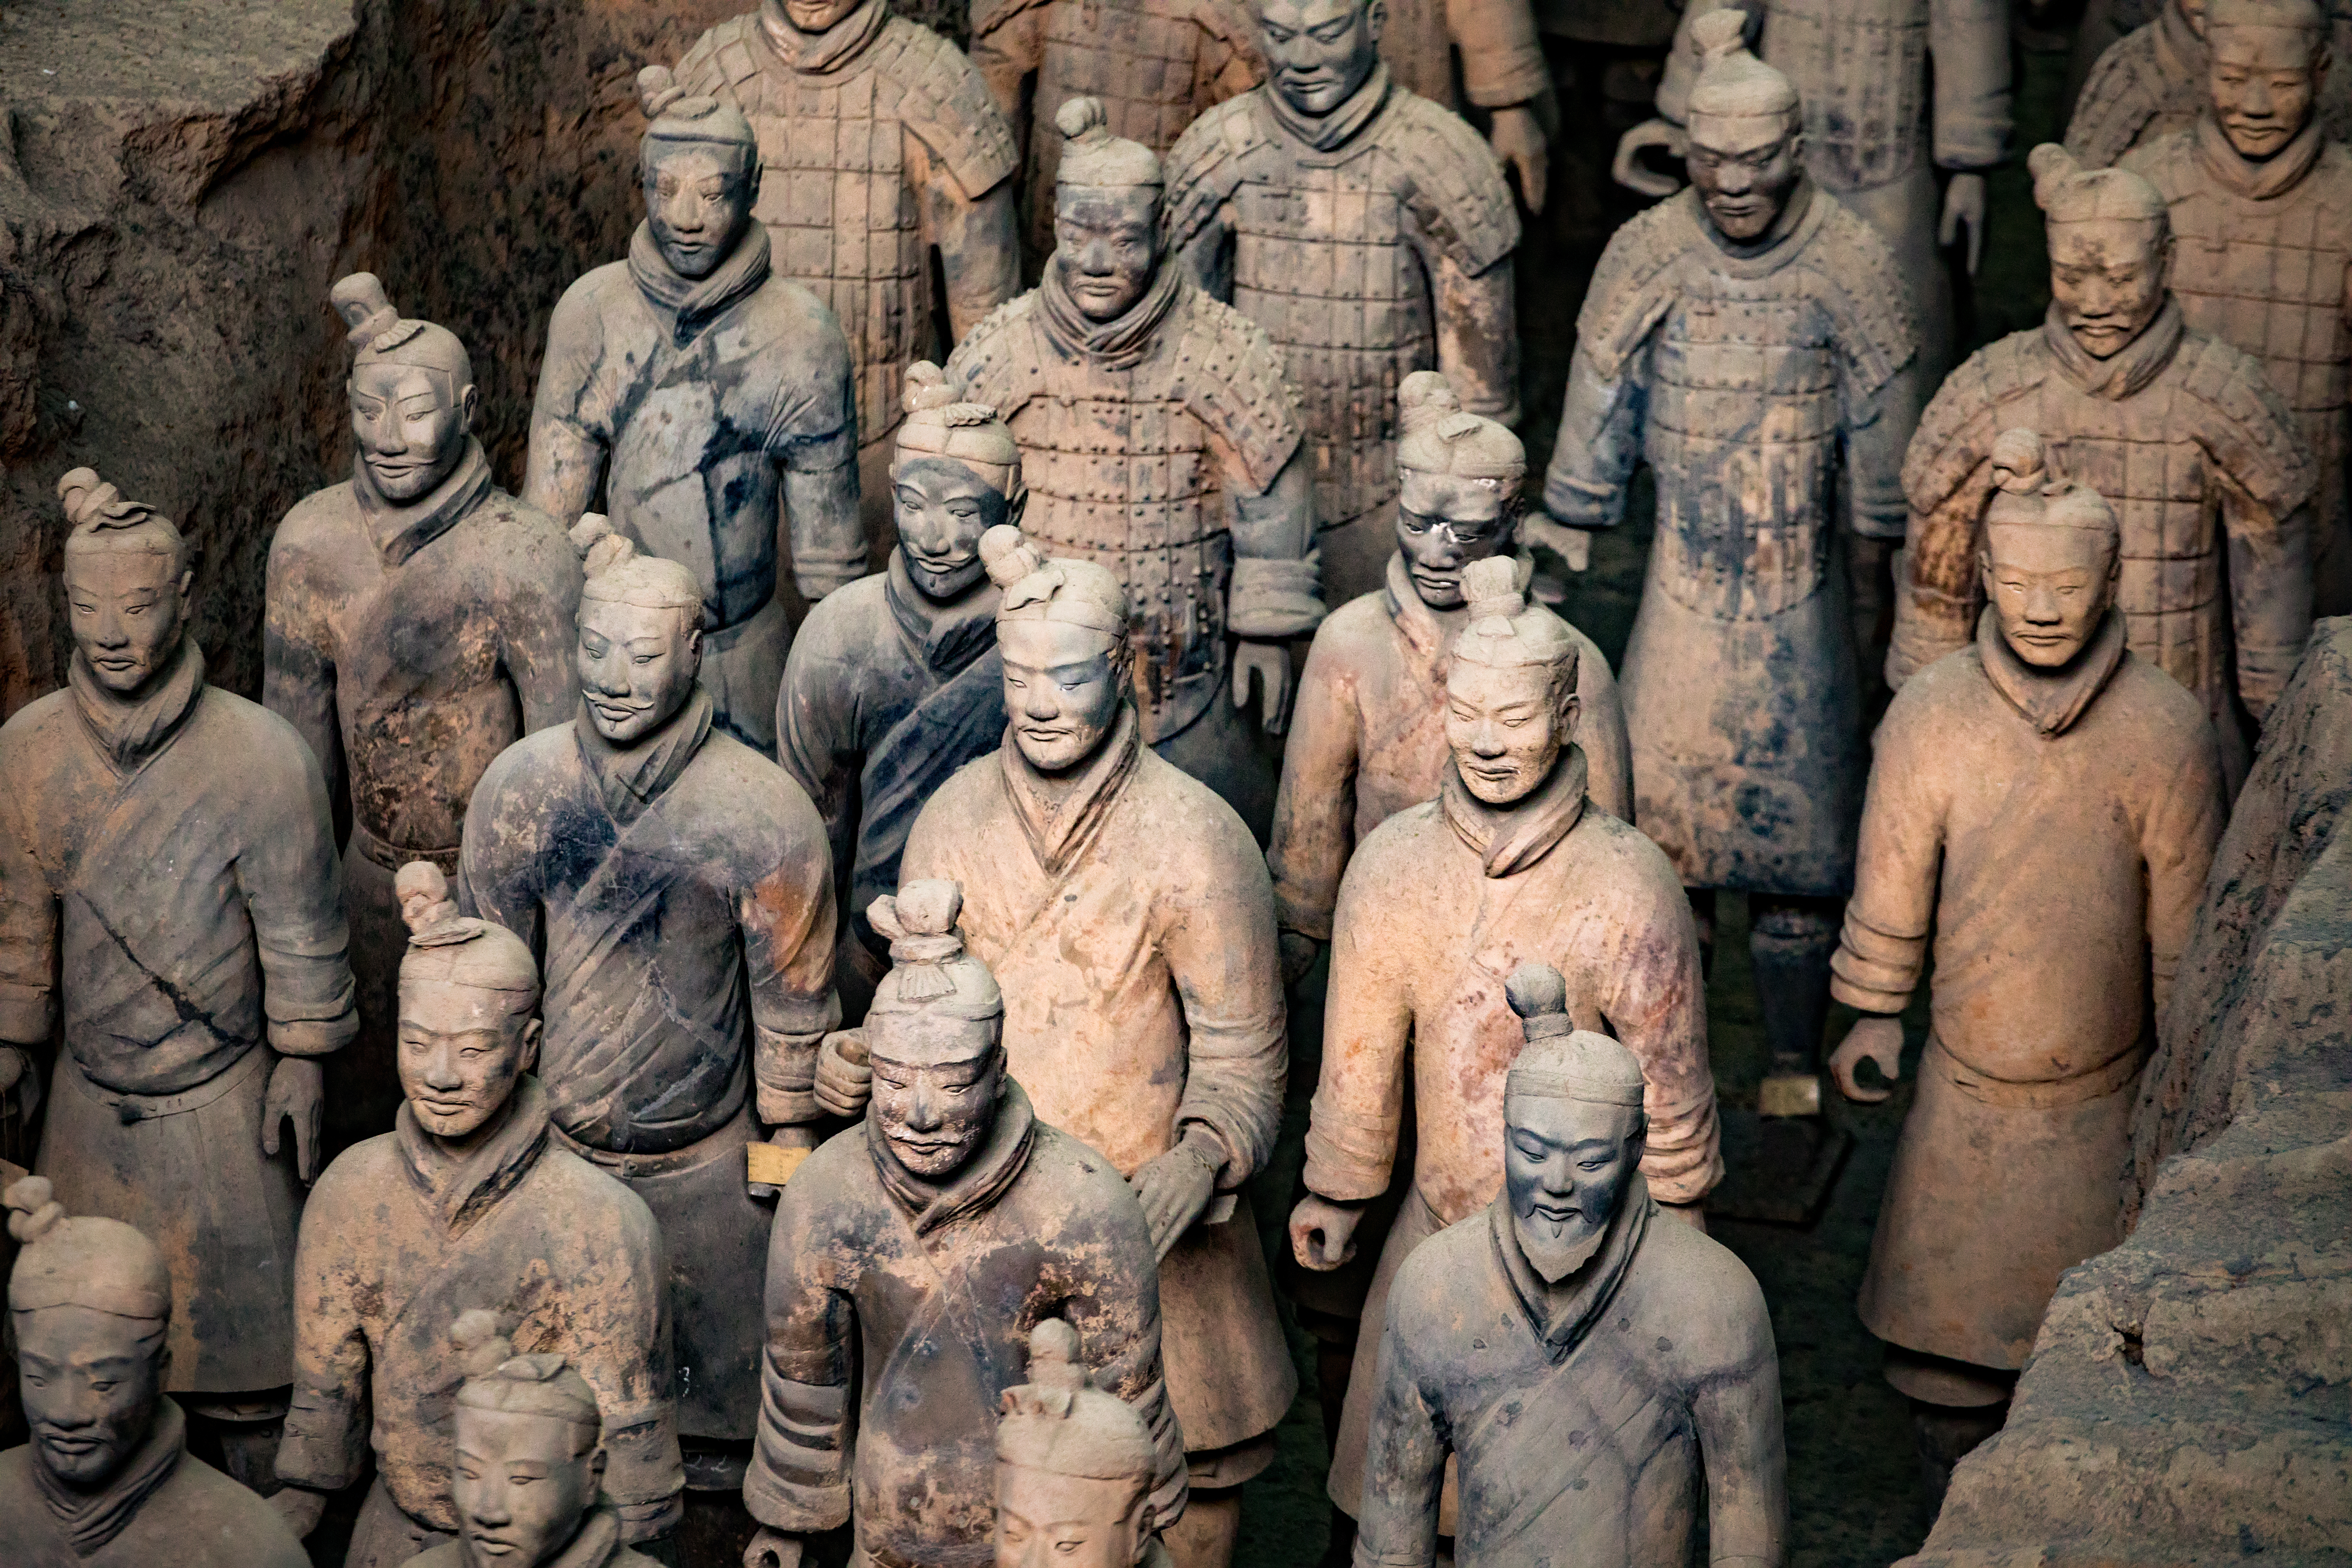 The Terracotta Army statues were discovered in a tomb in 1974 by a group of farmers